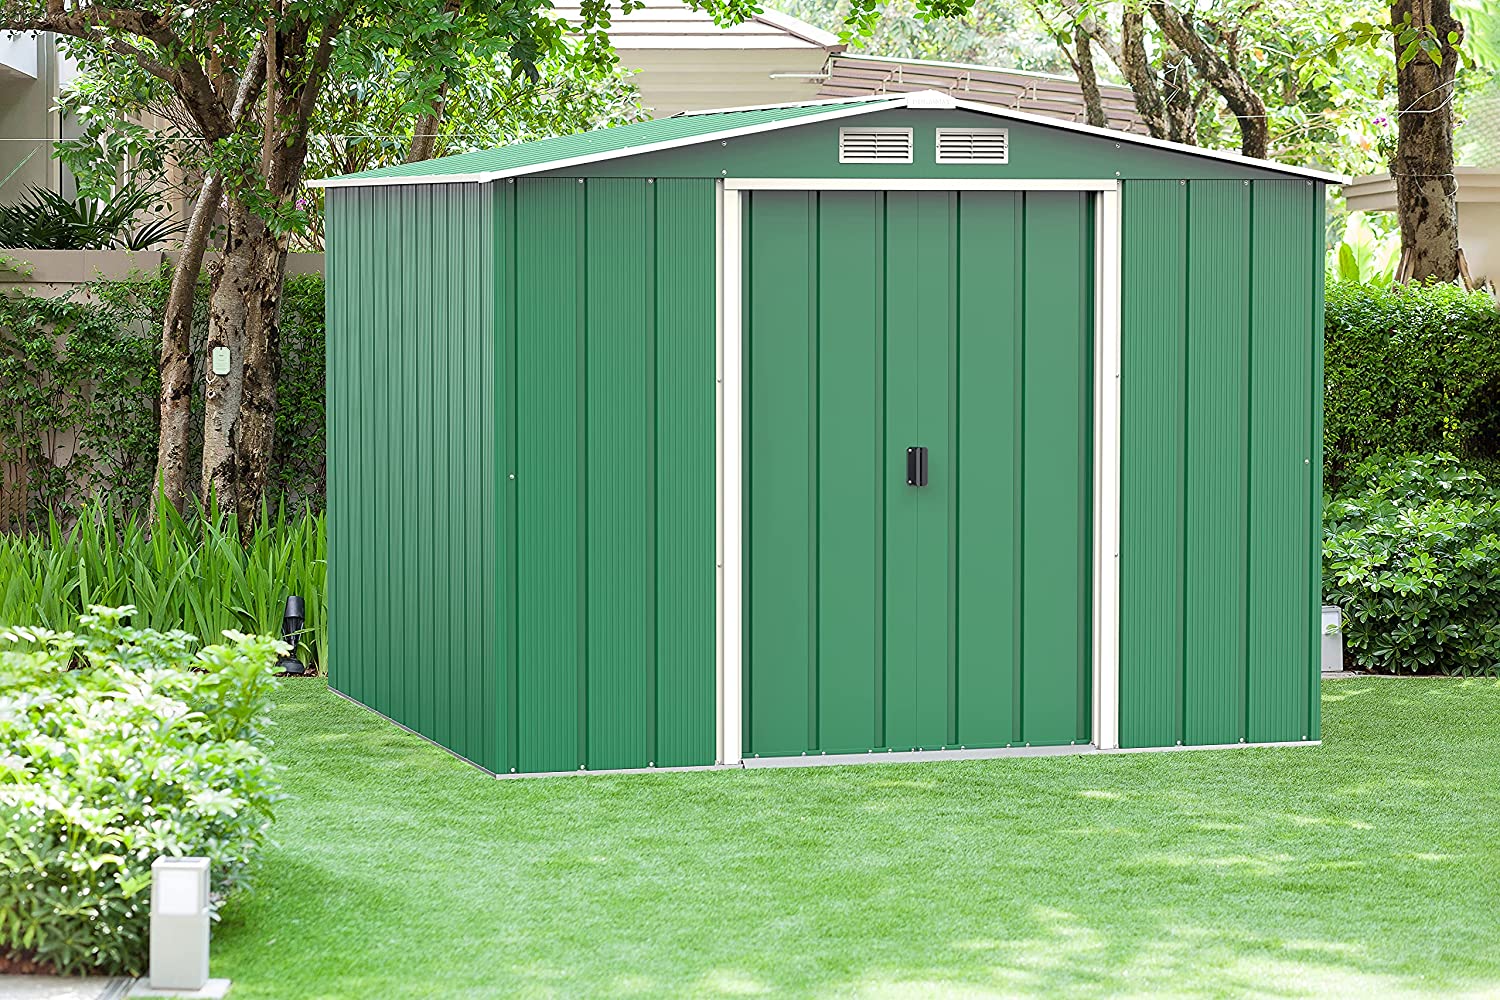  DURAMAX ECO METAL SHED 8X8FT GREEN